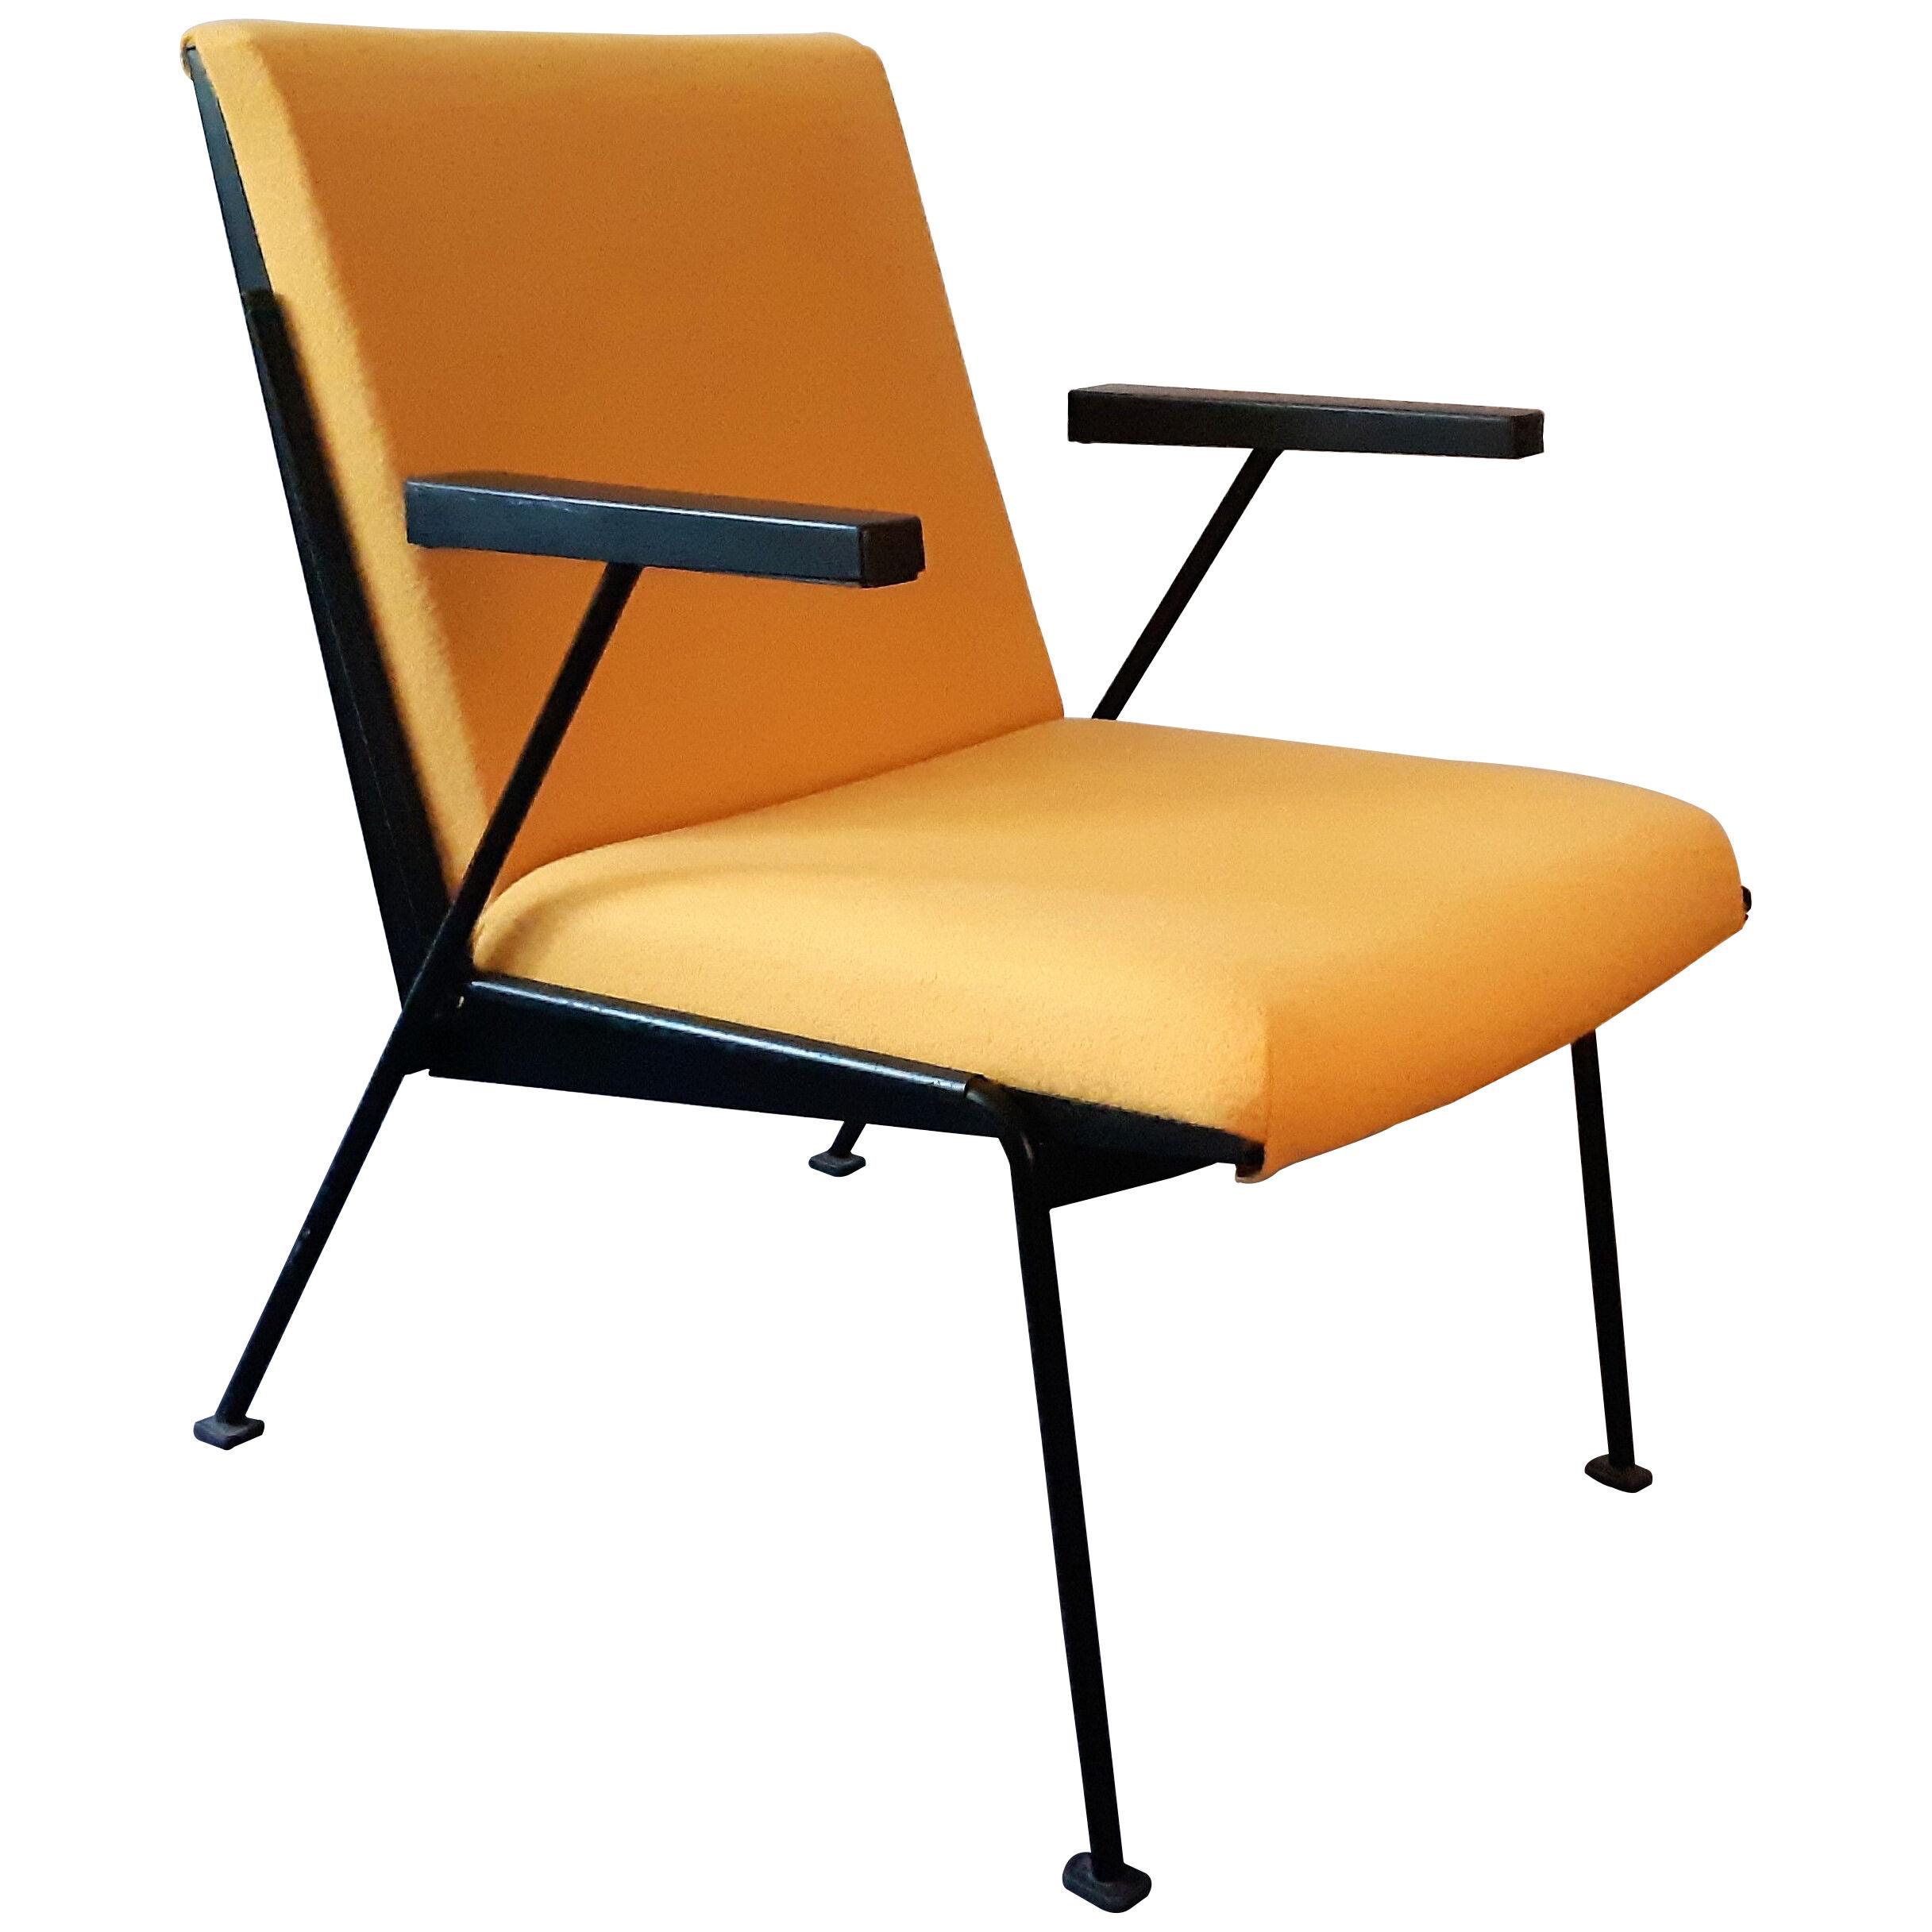 Yellow 'Oase' lounge chair with armrests by Wim Rietveld for Ahrend de Circel